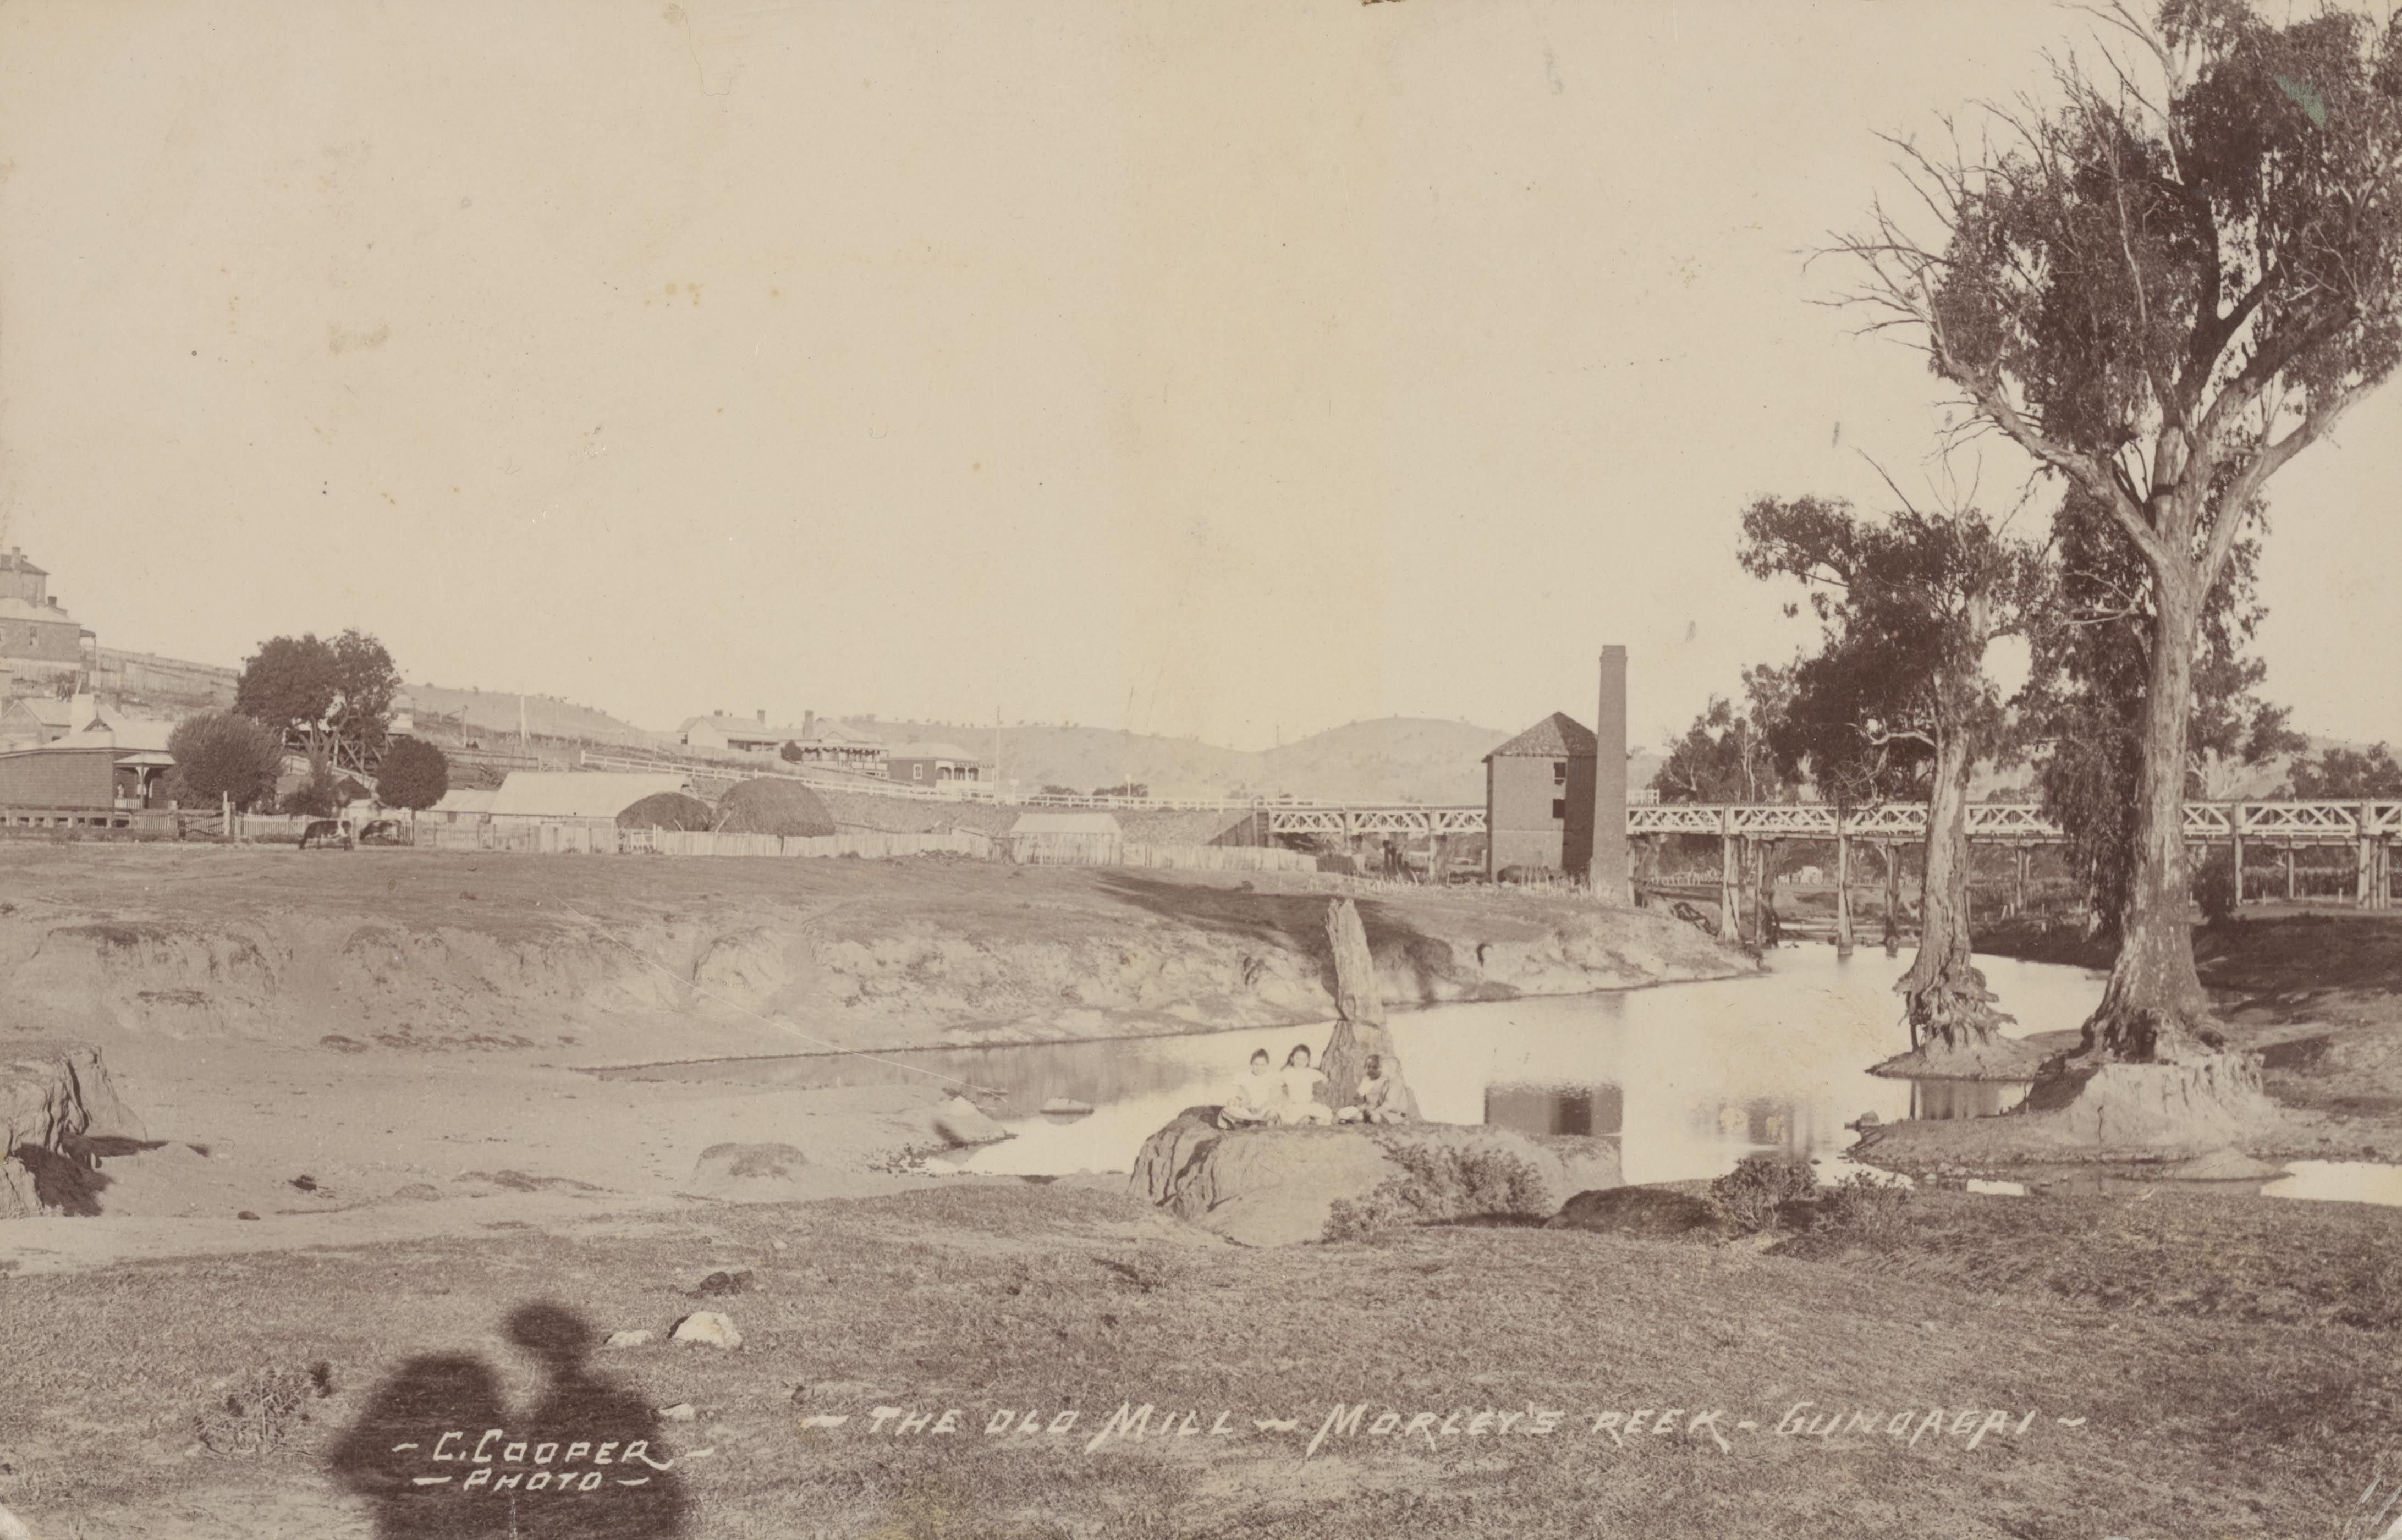 Postcard showing The Old Mill, Morley's Creek, Gundagai. Postmarked 23 March 1907. 